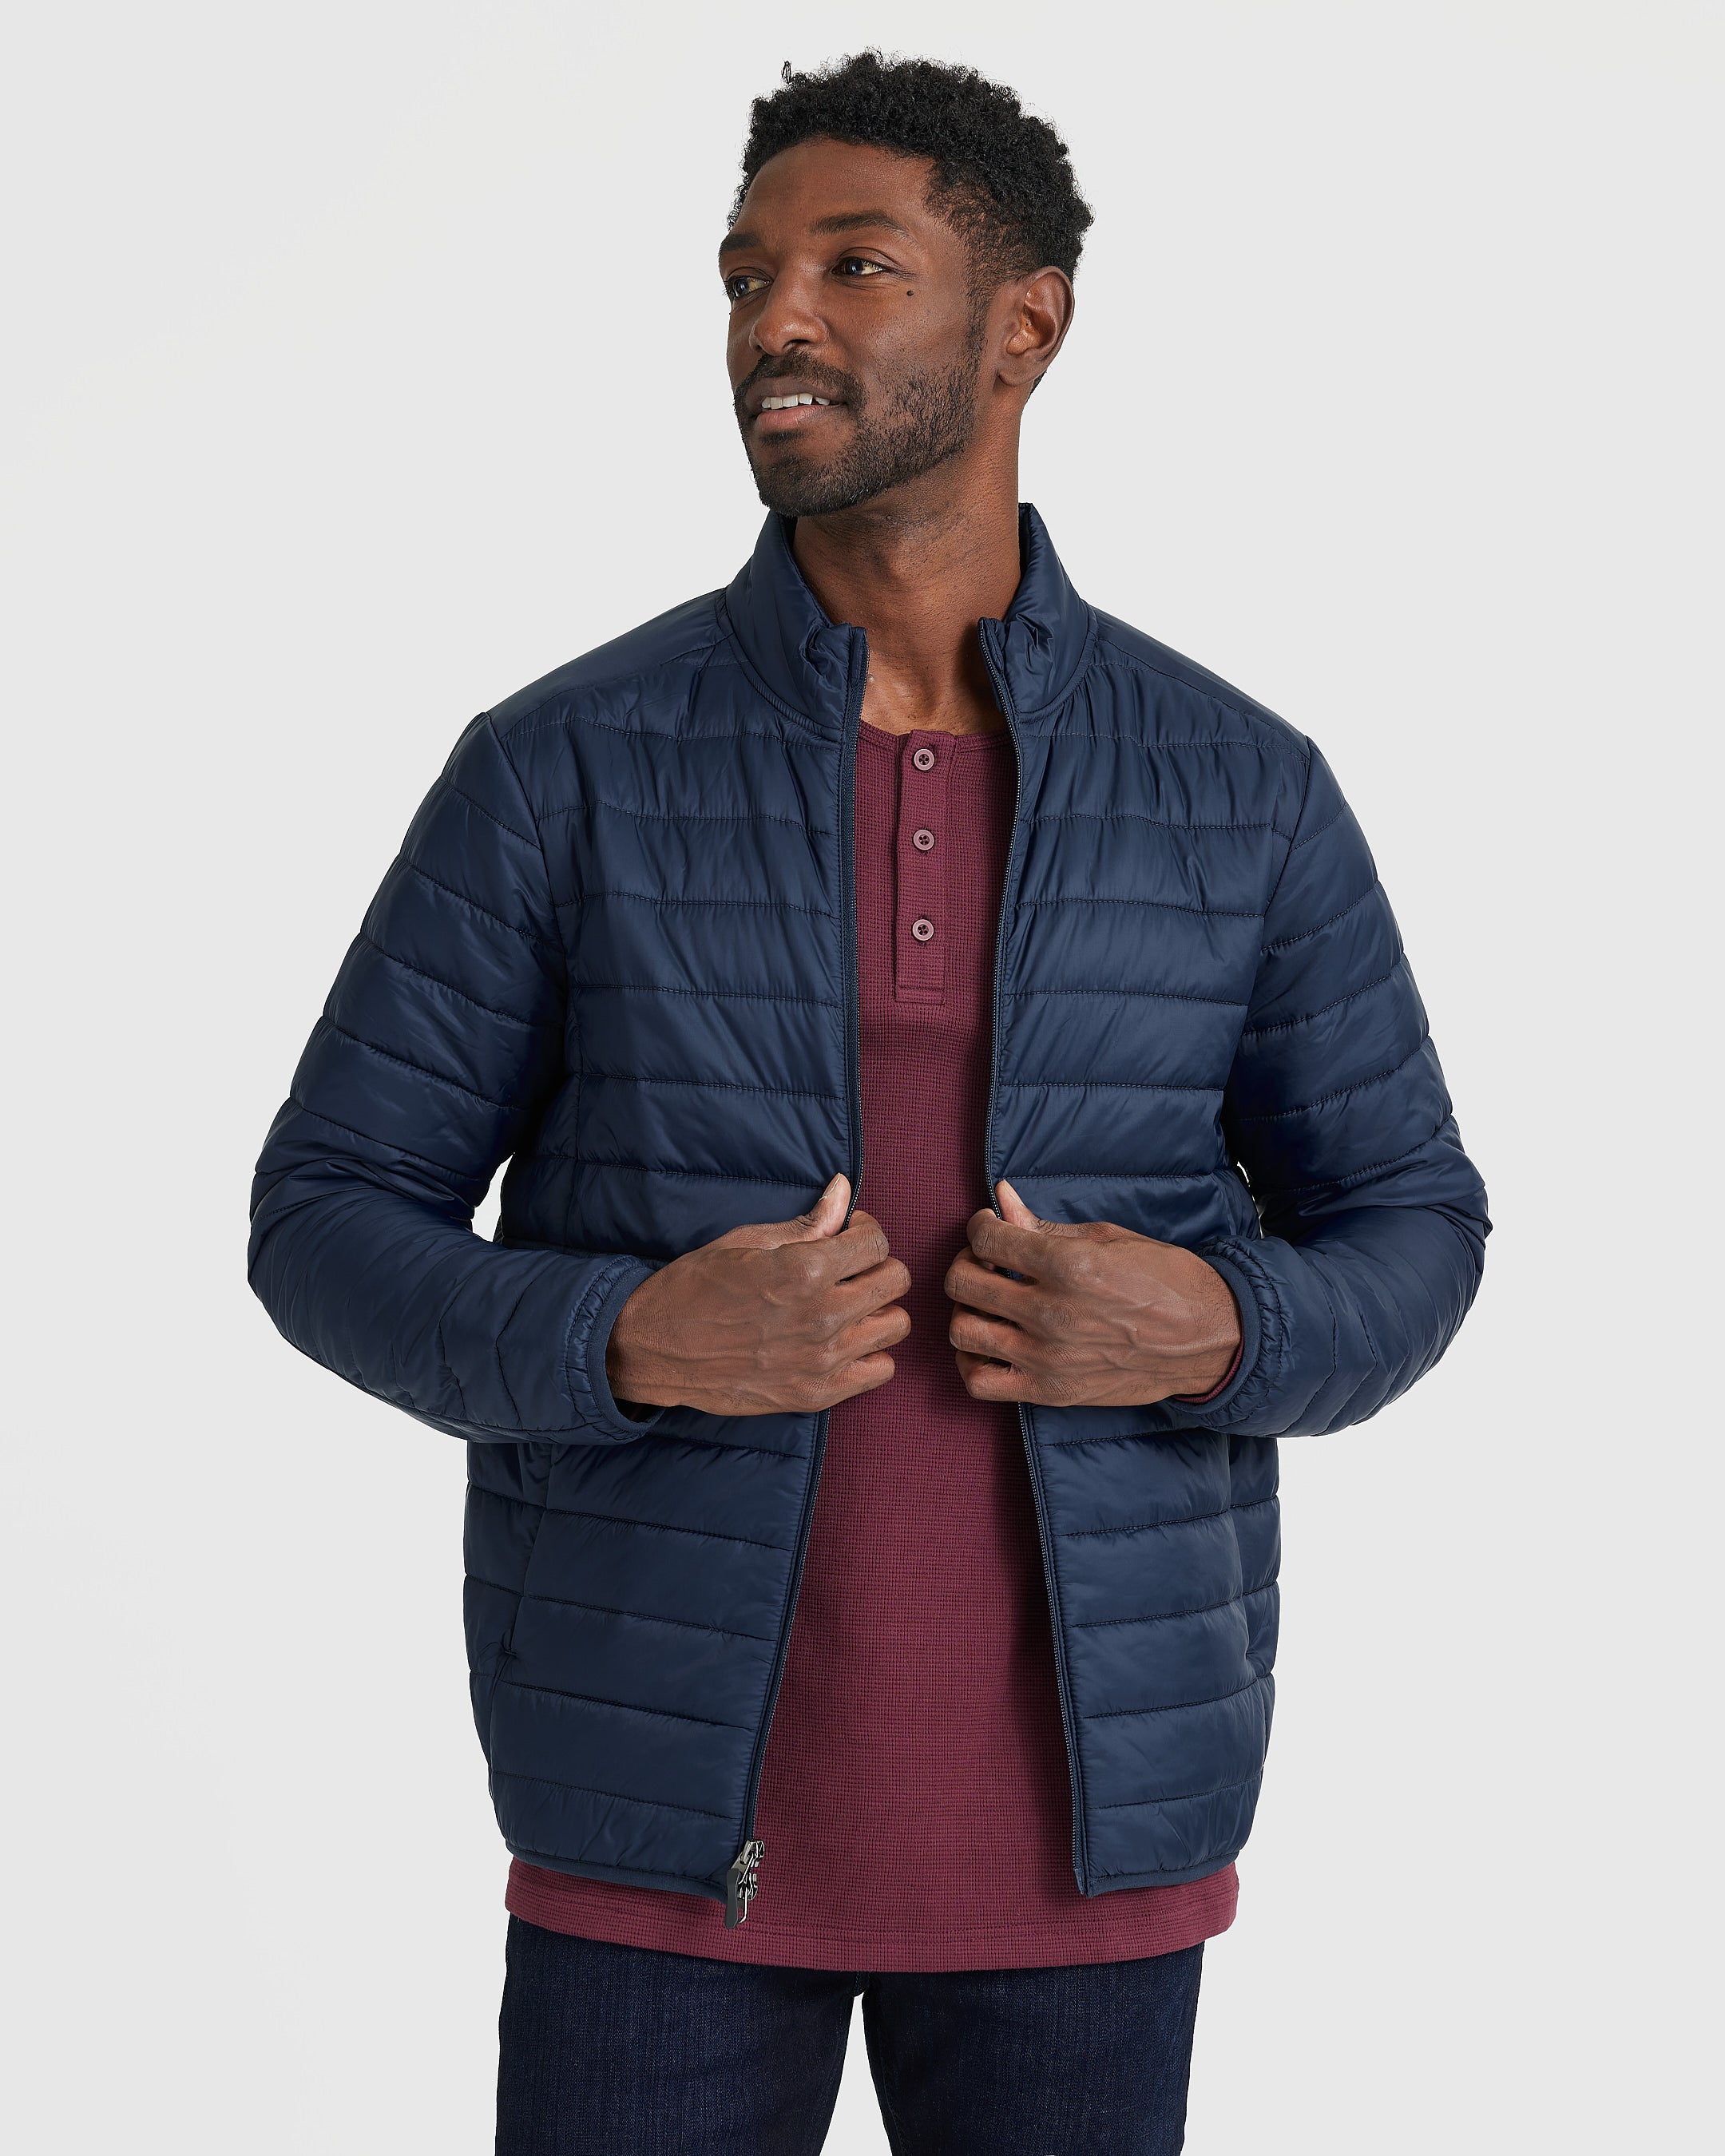 Winter Staples Gifting 7-Pack